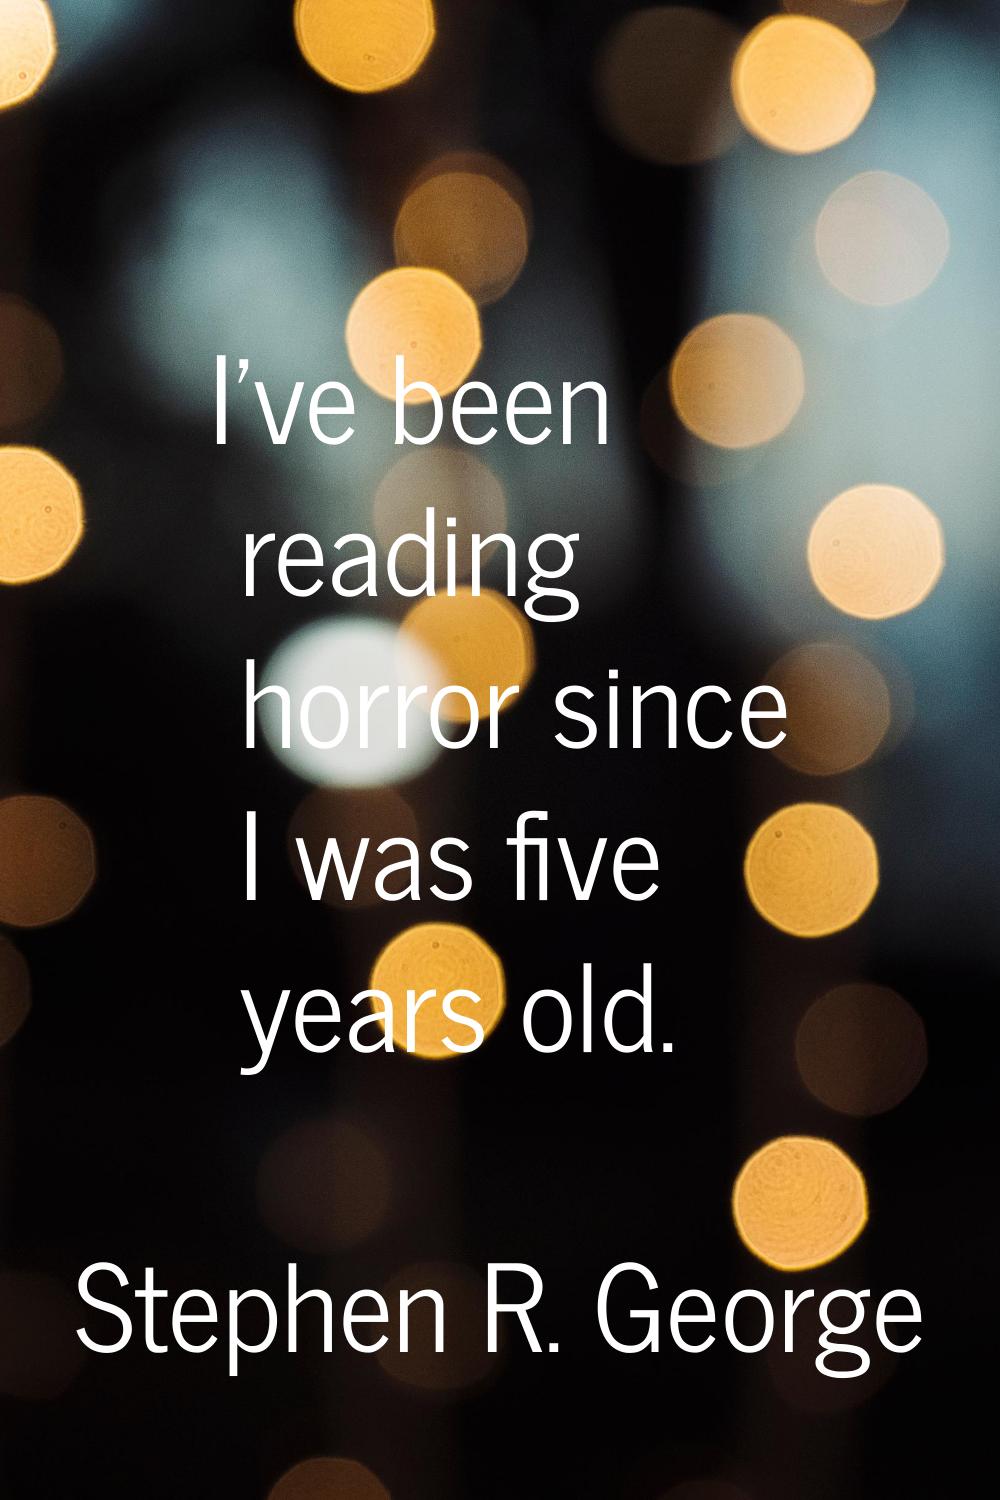 I've been reading horror since I was five years old.